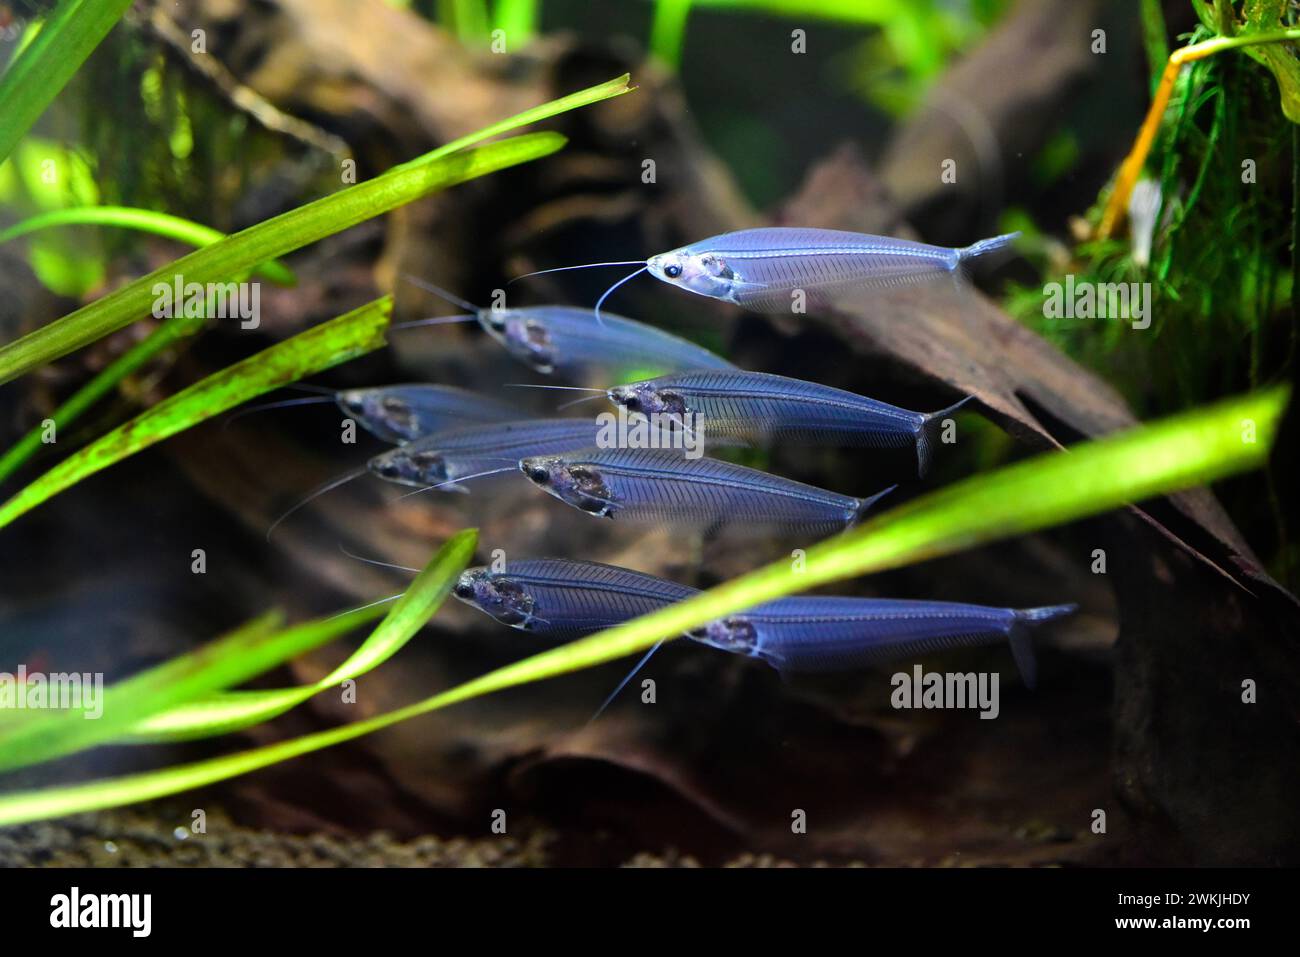 Glass catfish (Kryptopterus bicirrhis) is a transparent freshwater fish native to southeast Asia rivers. Stock Photo